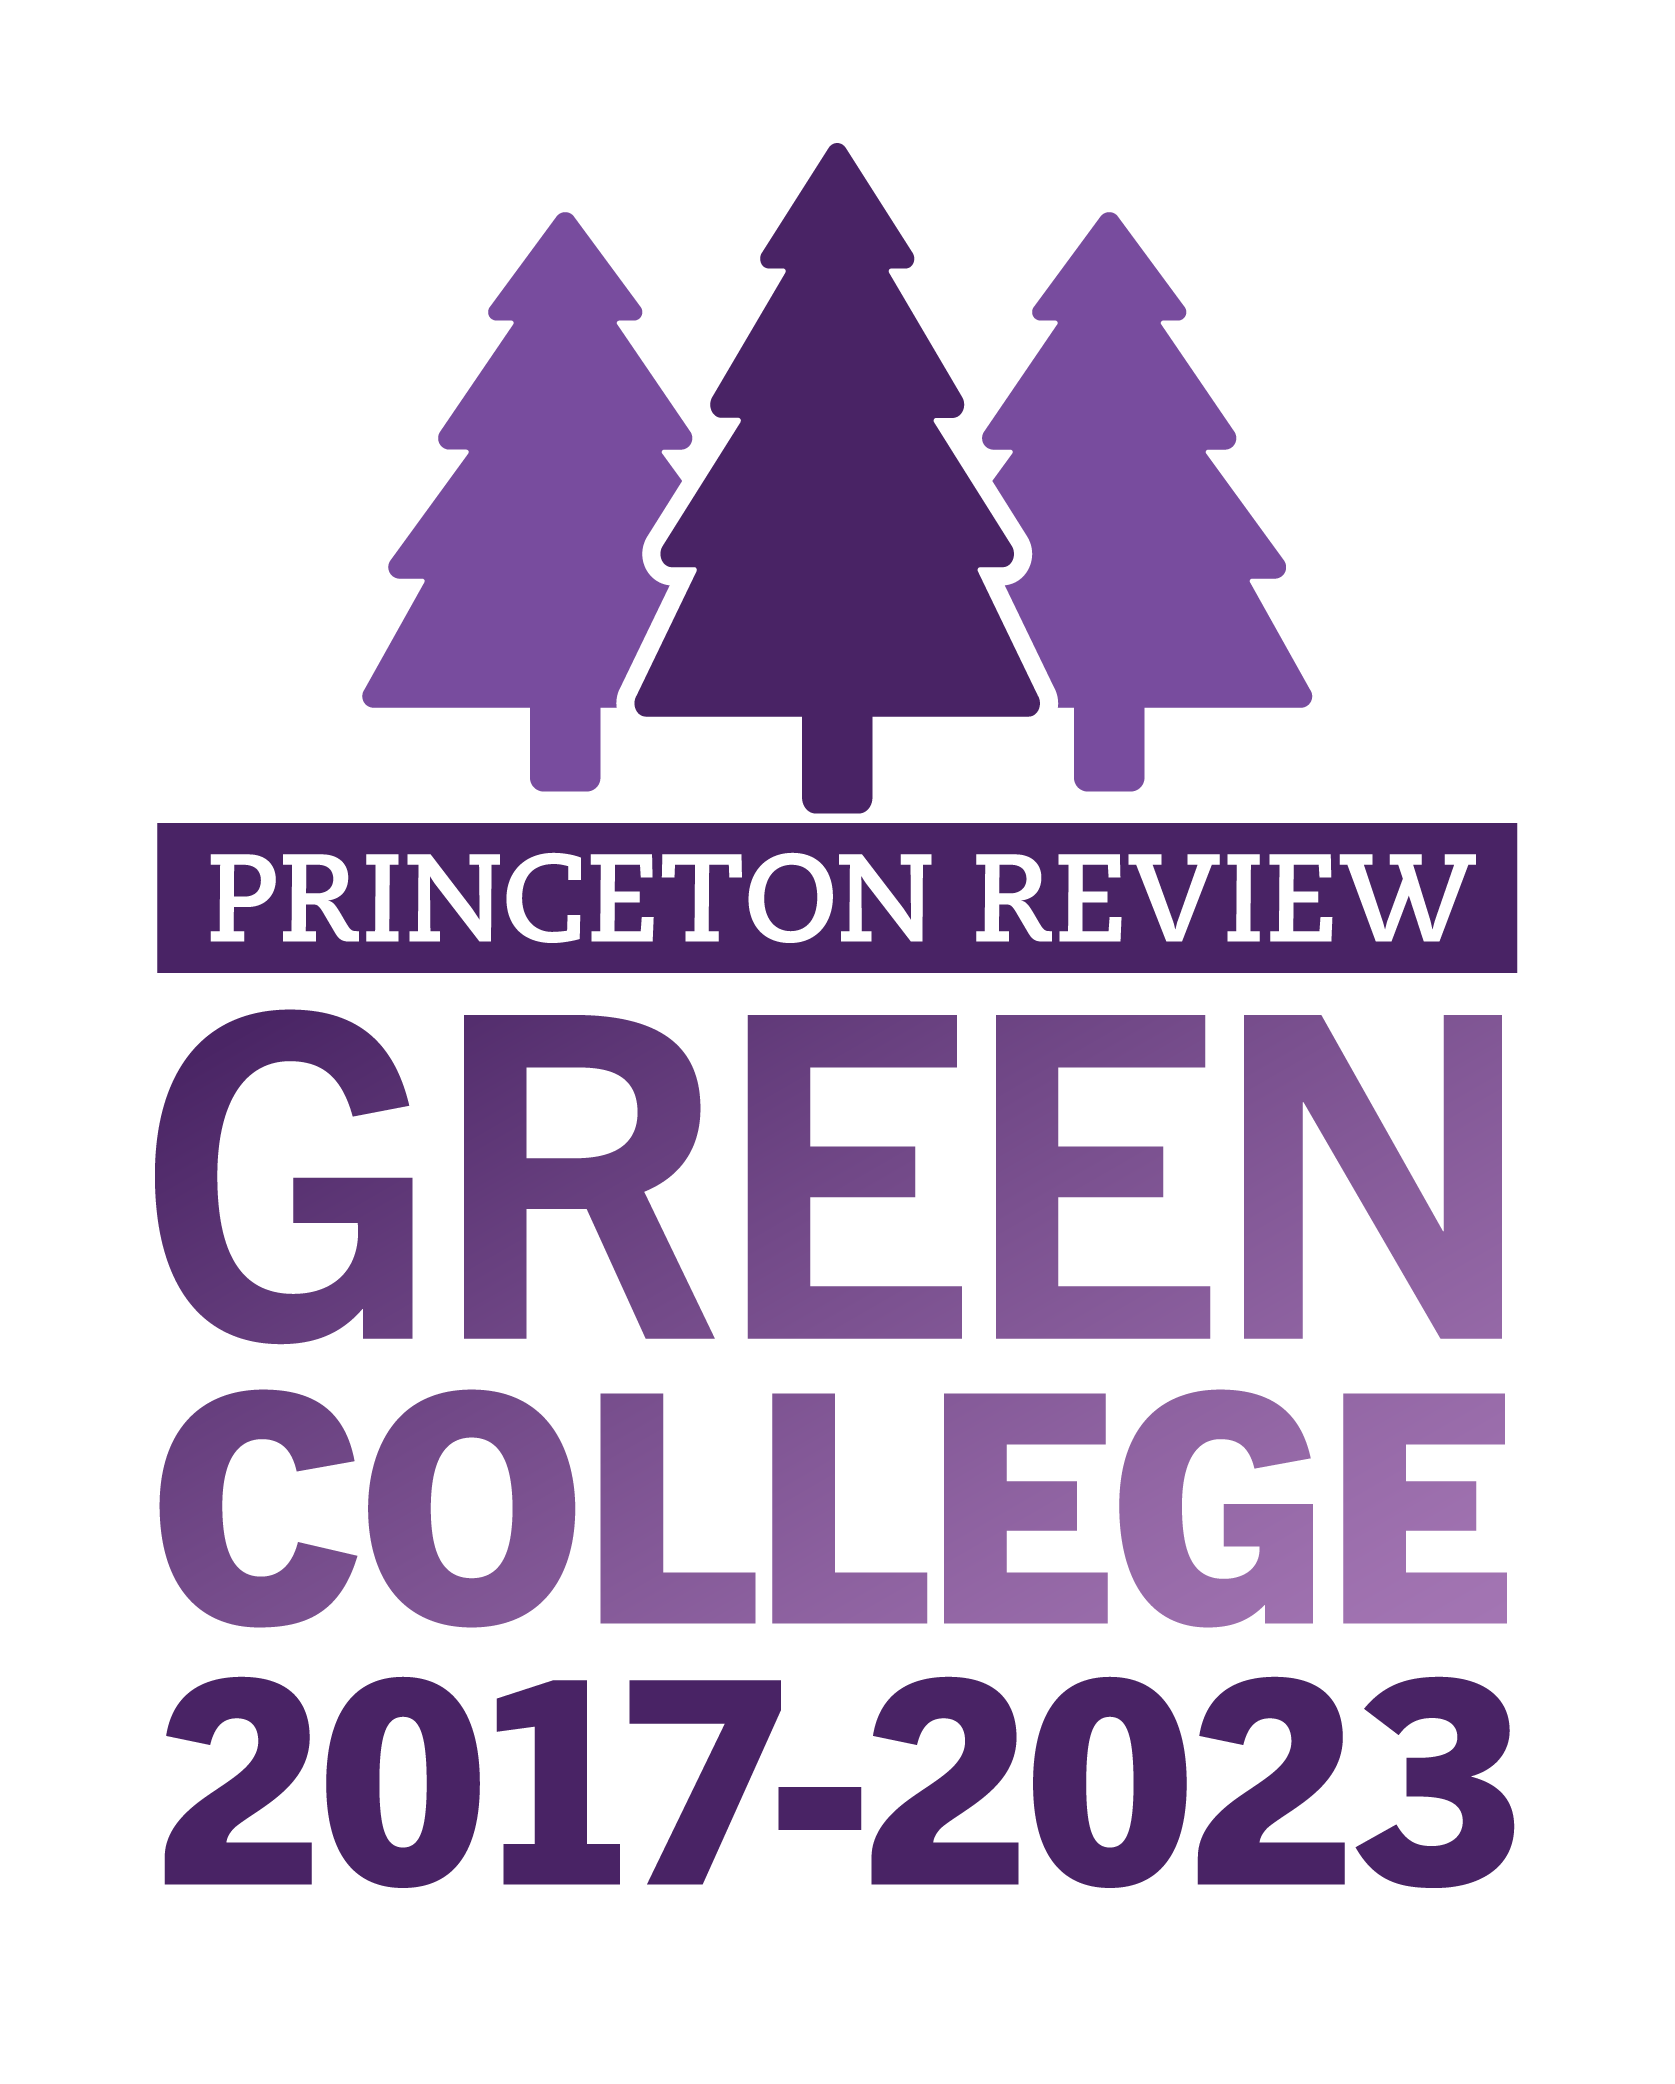 Weber State has been a Princeton Review green college from 2017-2023.